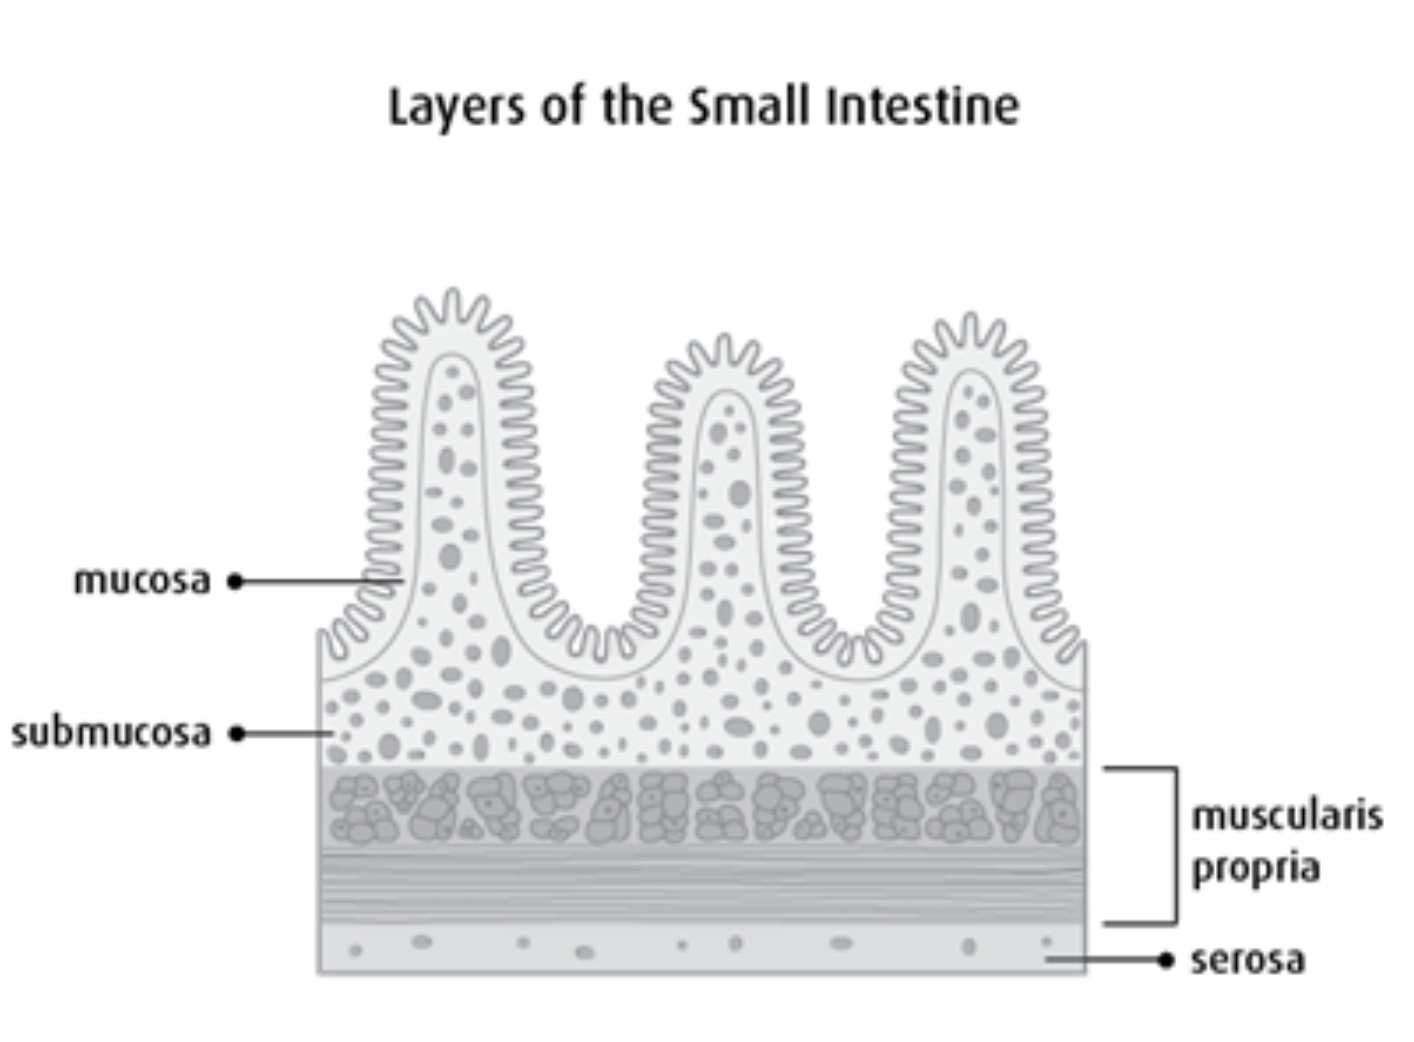 <ul><li><p>Epithelial layer, responsible for <strong>nutrient absorption</strong></p></li></ul>